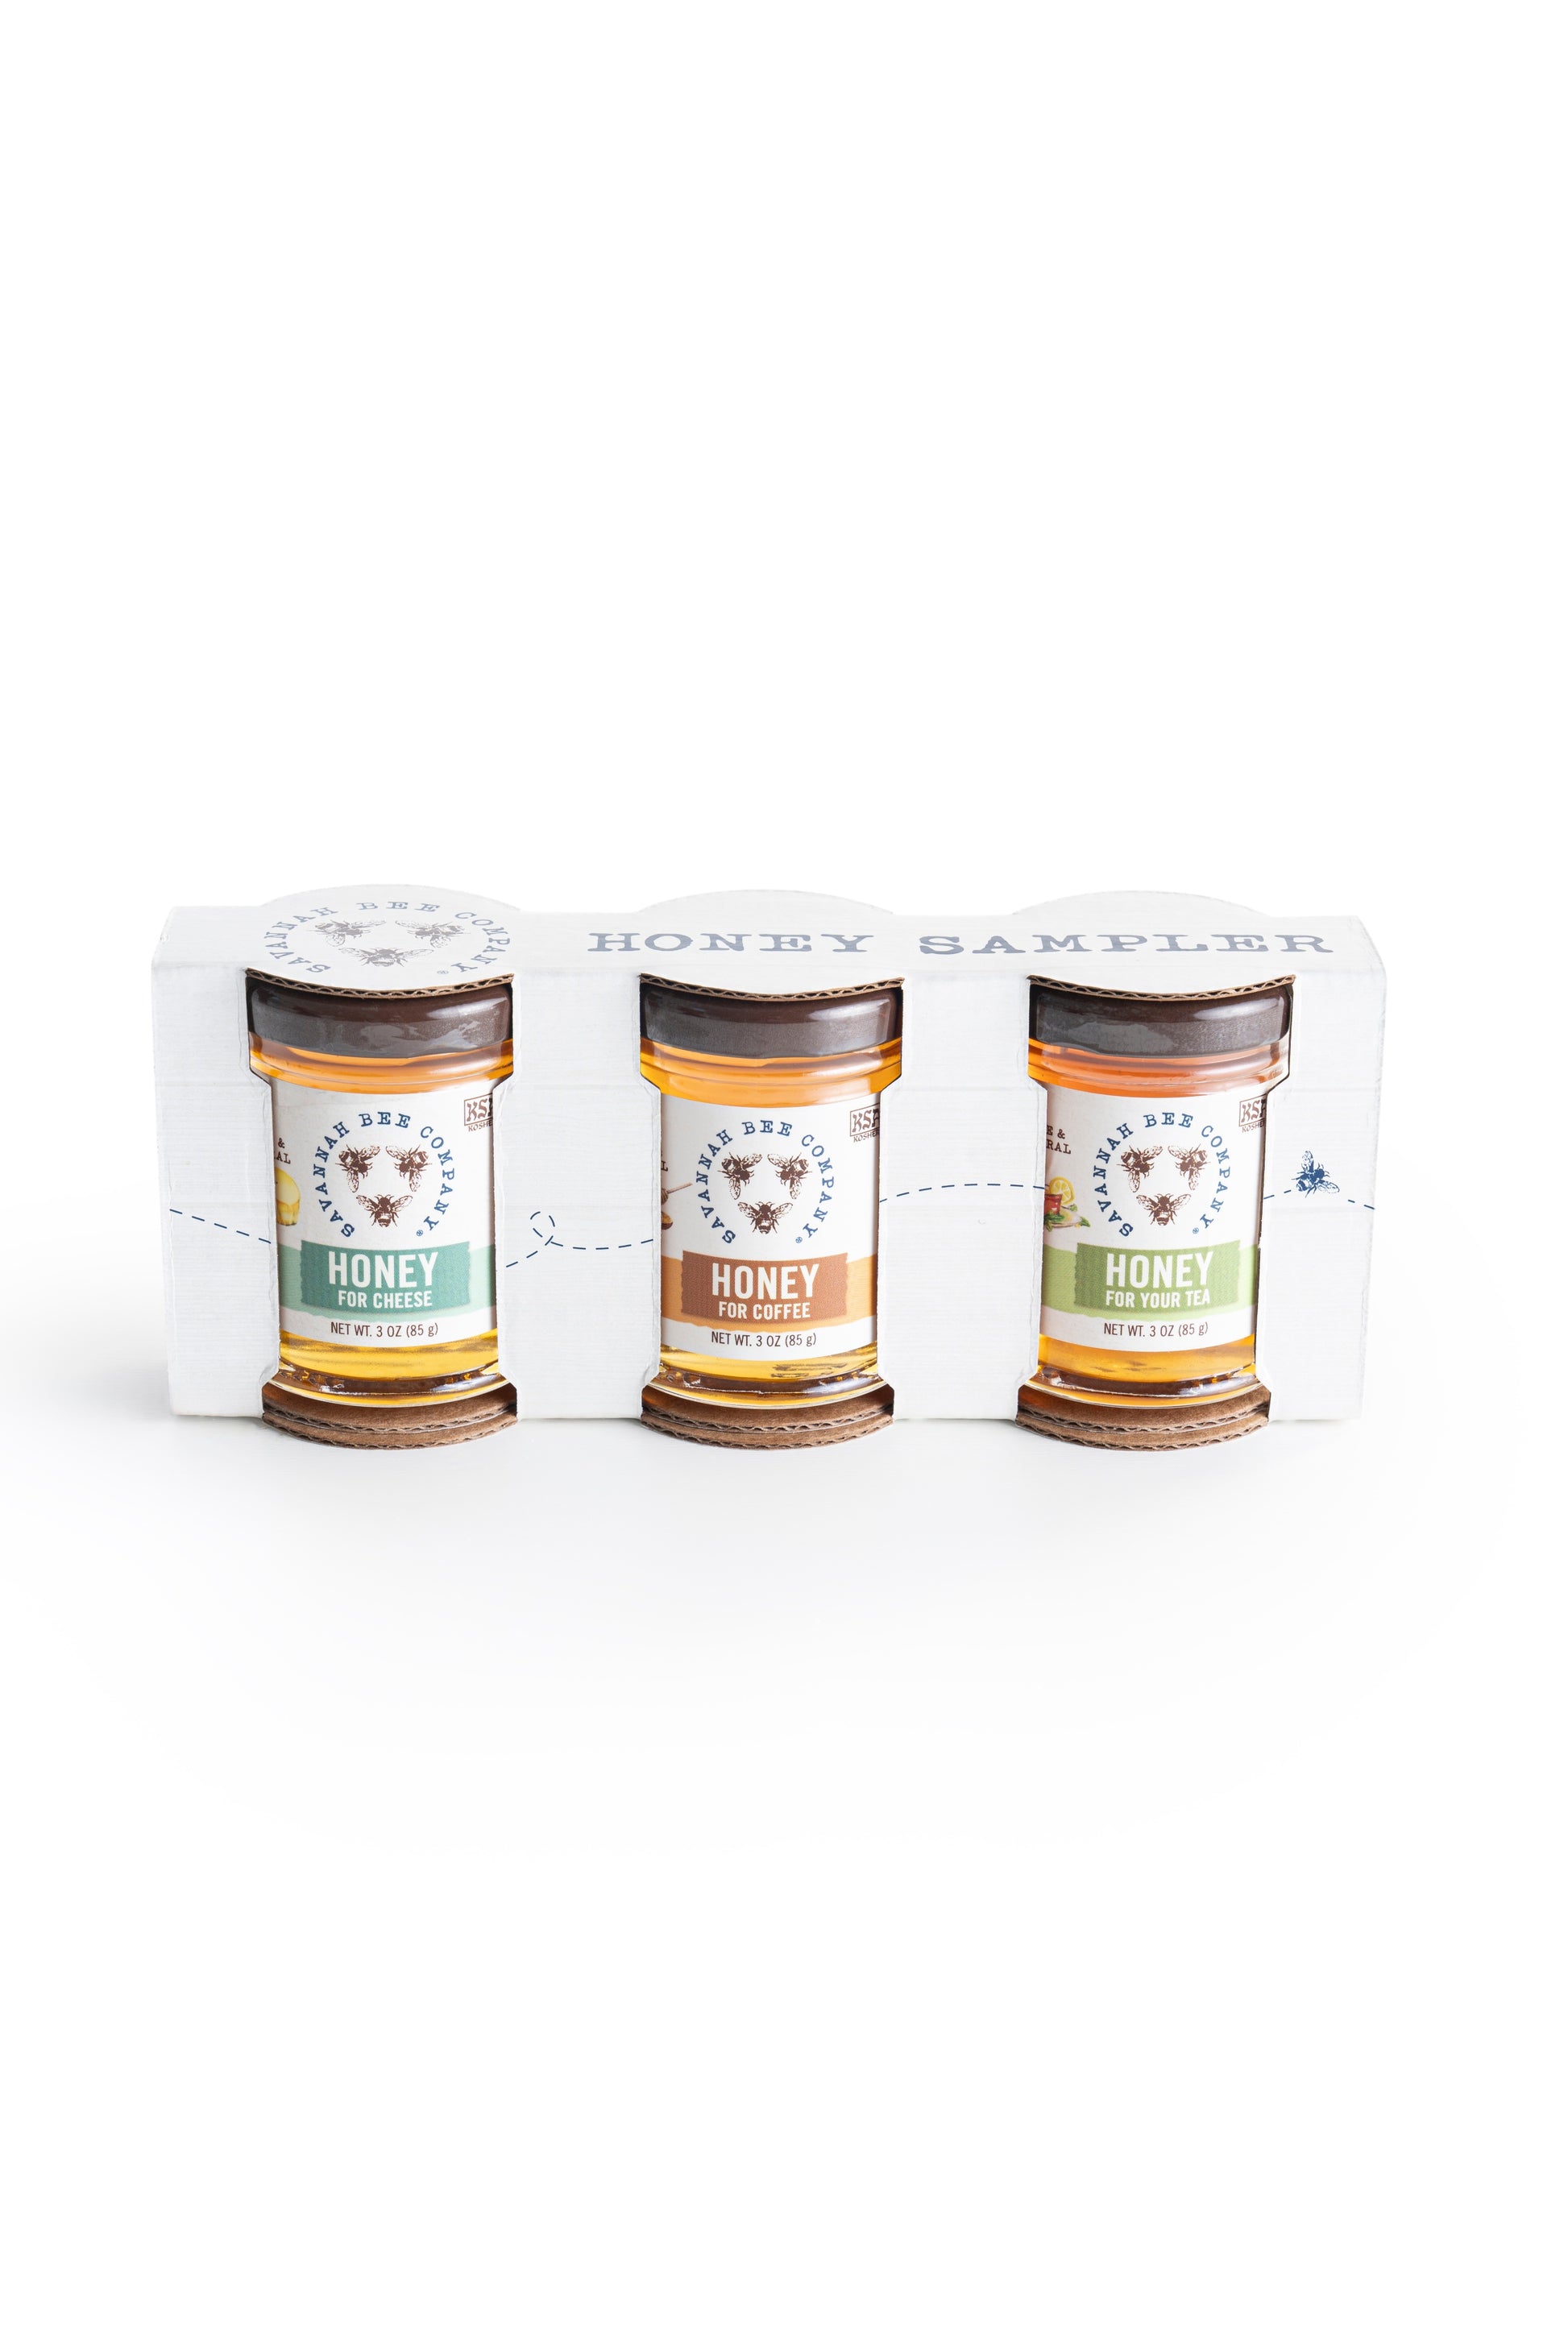 Sample Tins 3 oz. - Available in an Assortment of Quantities